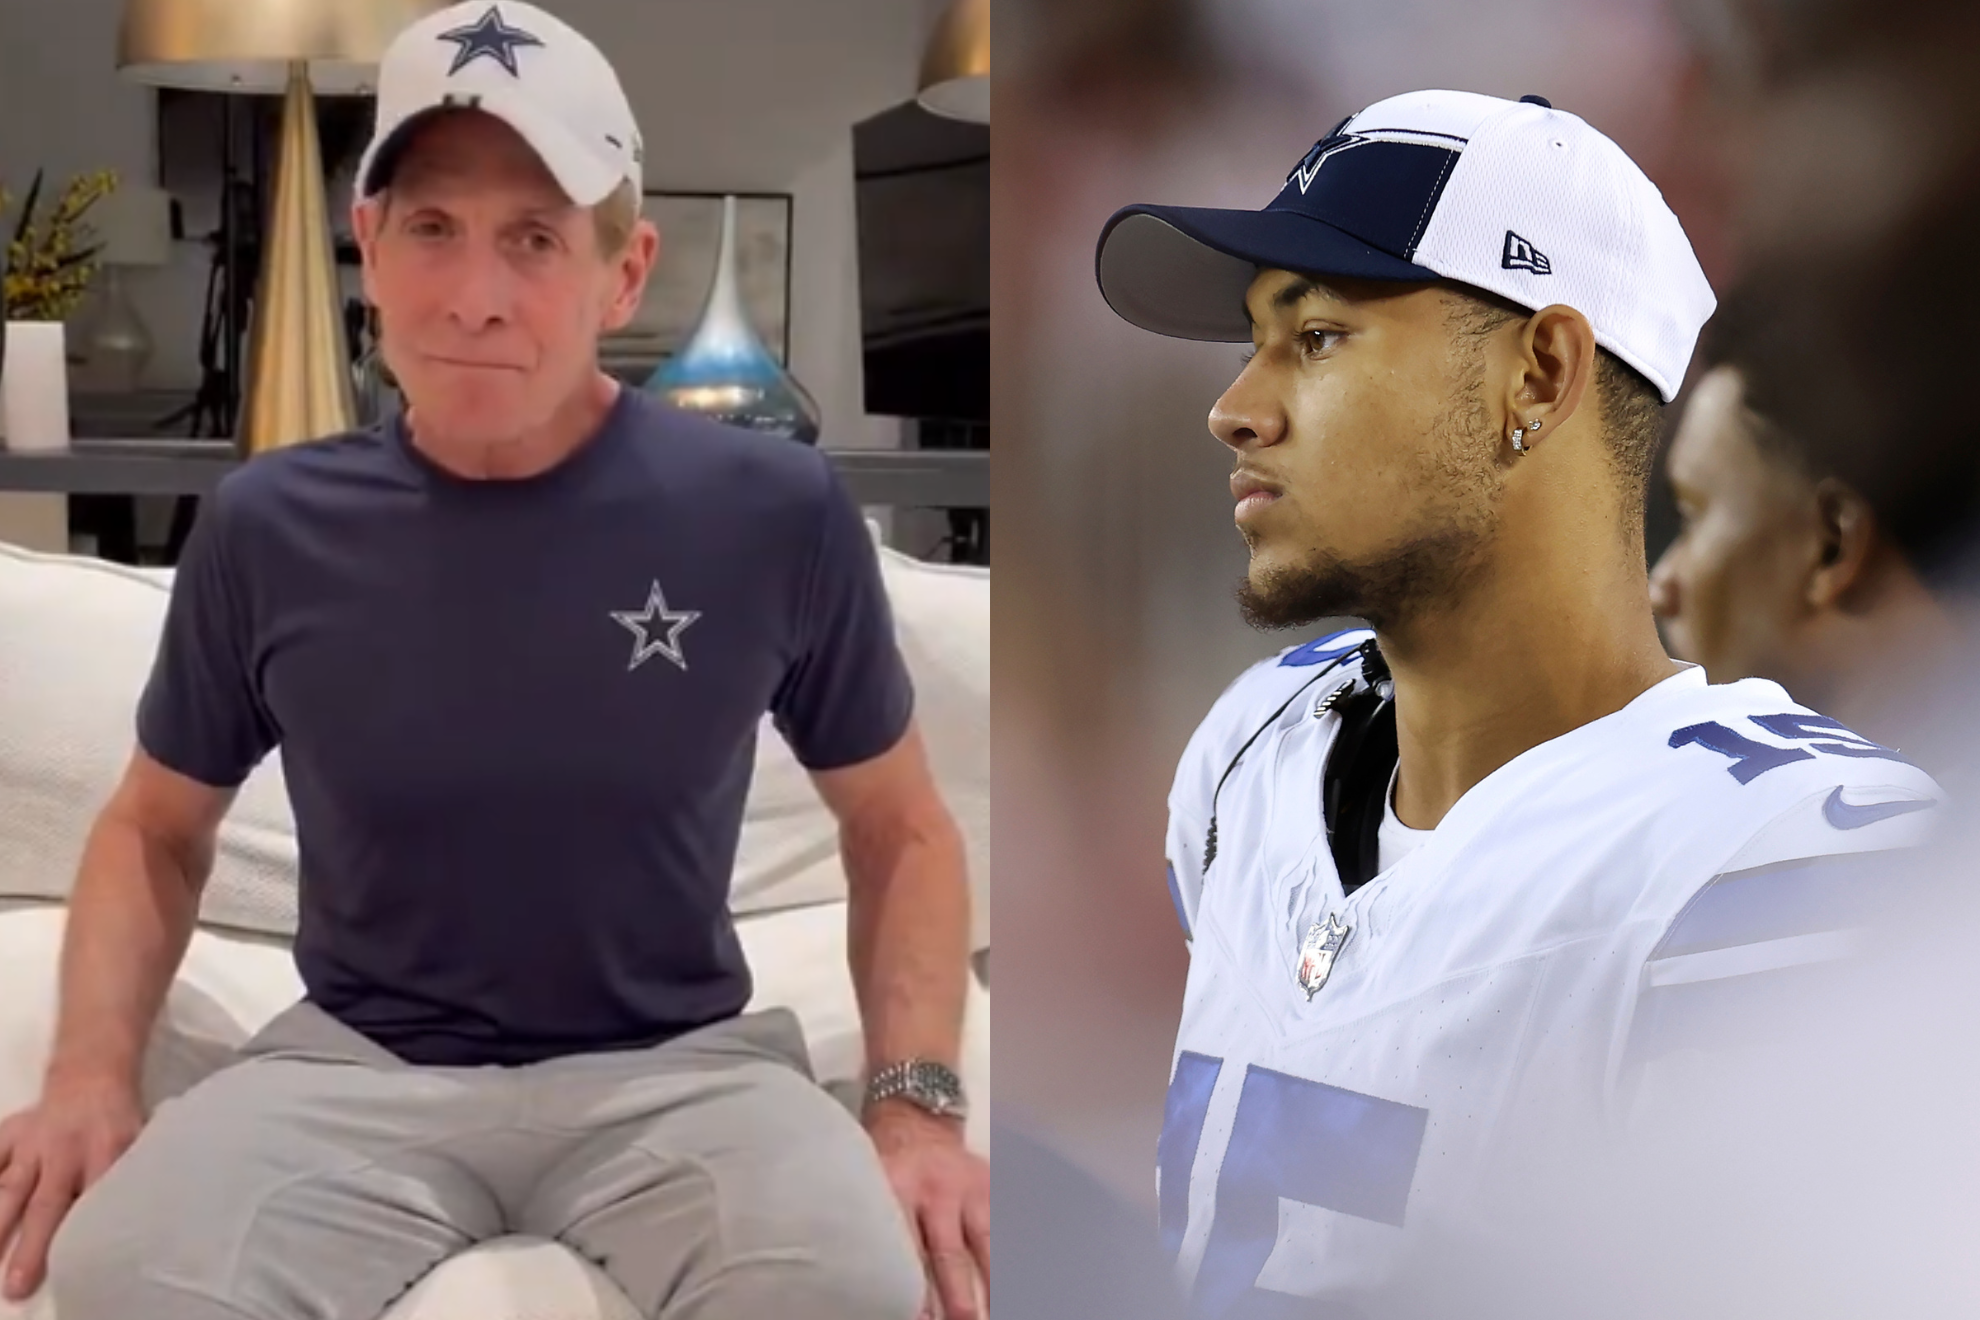 The FS1 personality Bayless (left) is fed up with Dak Prescott and wanted Trey Lance (right) to replace him.